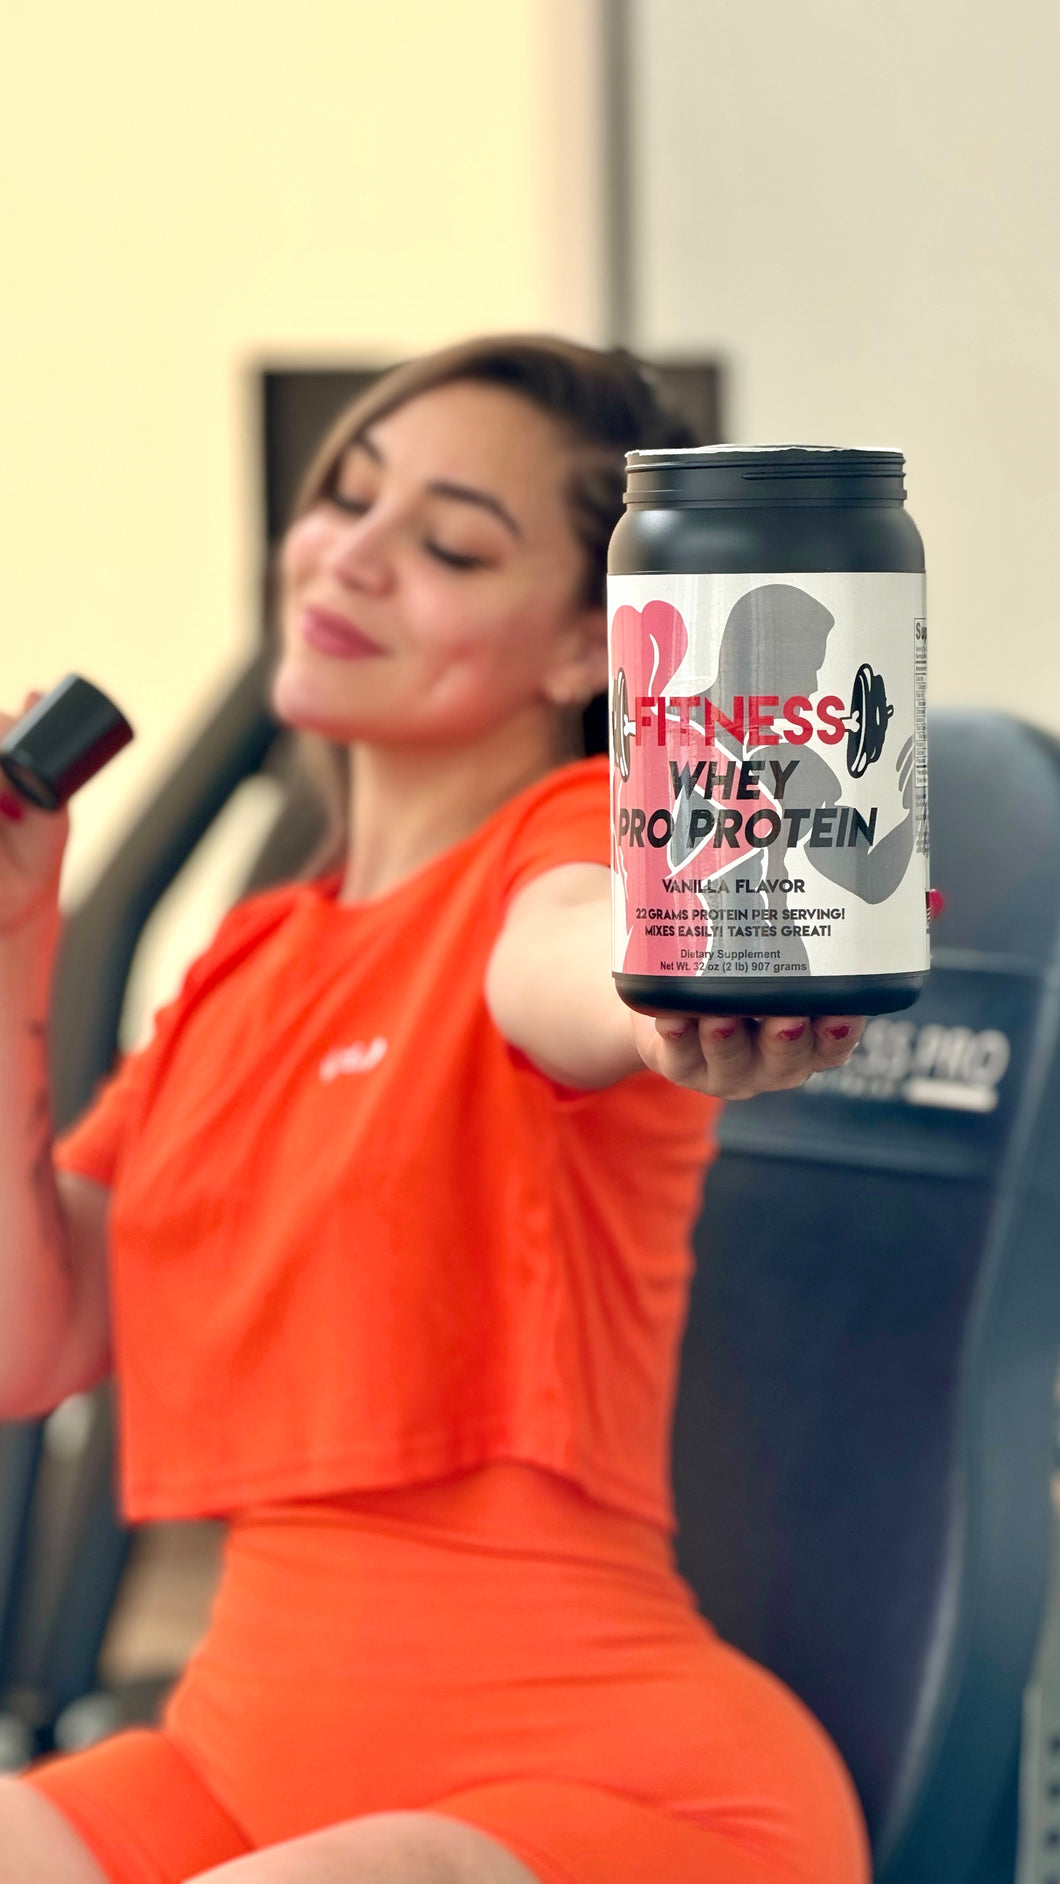 100% Whey FITNESS Protein gym supplement